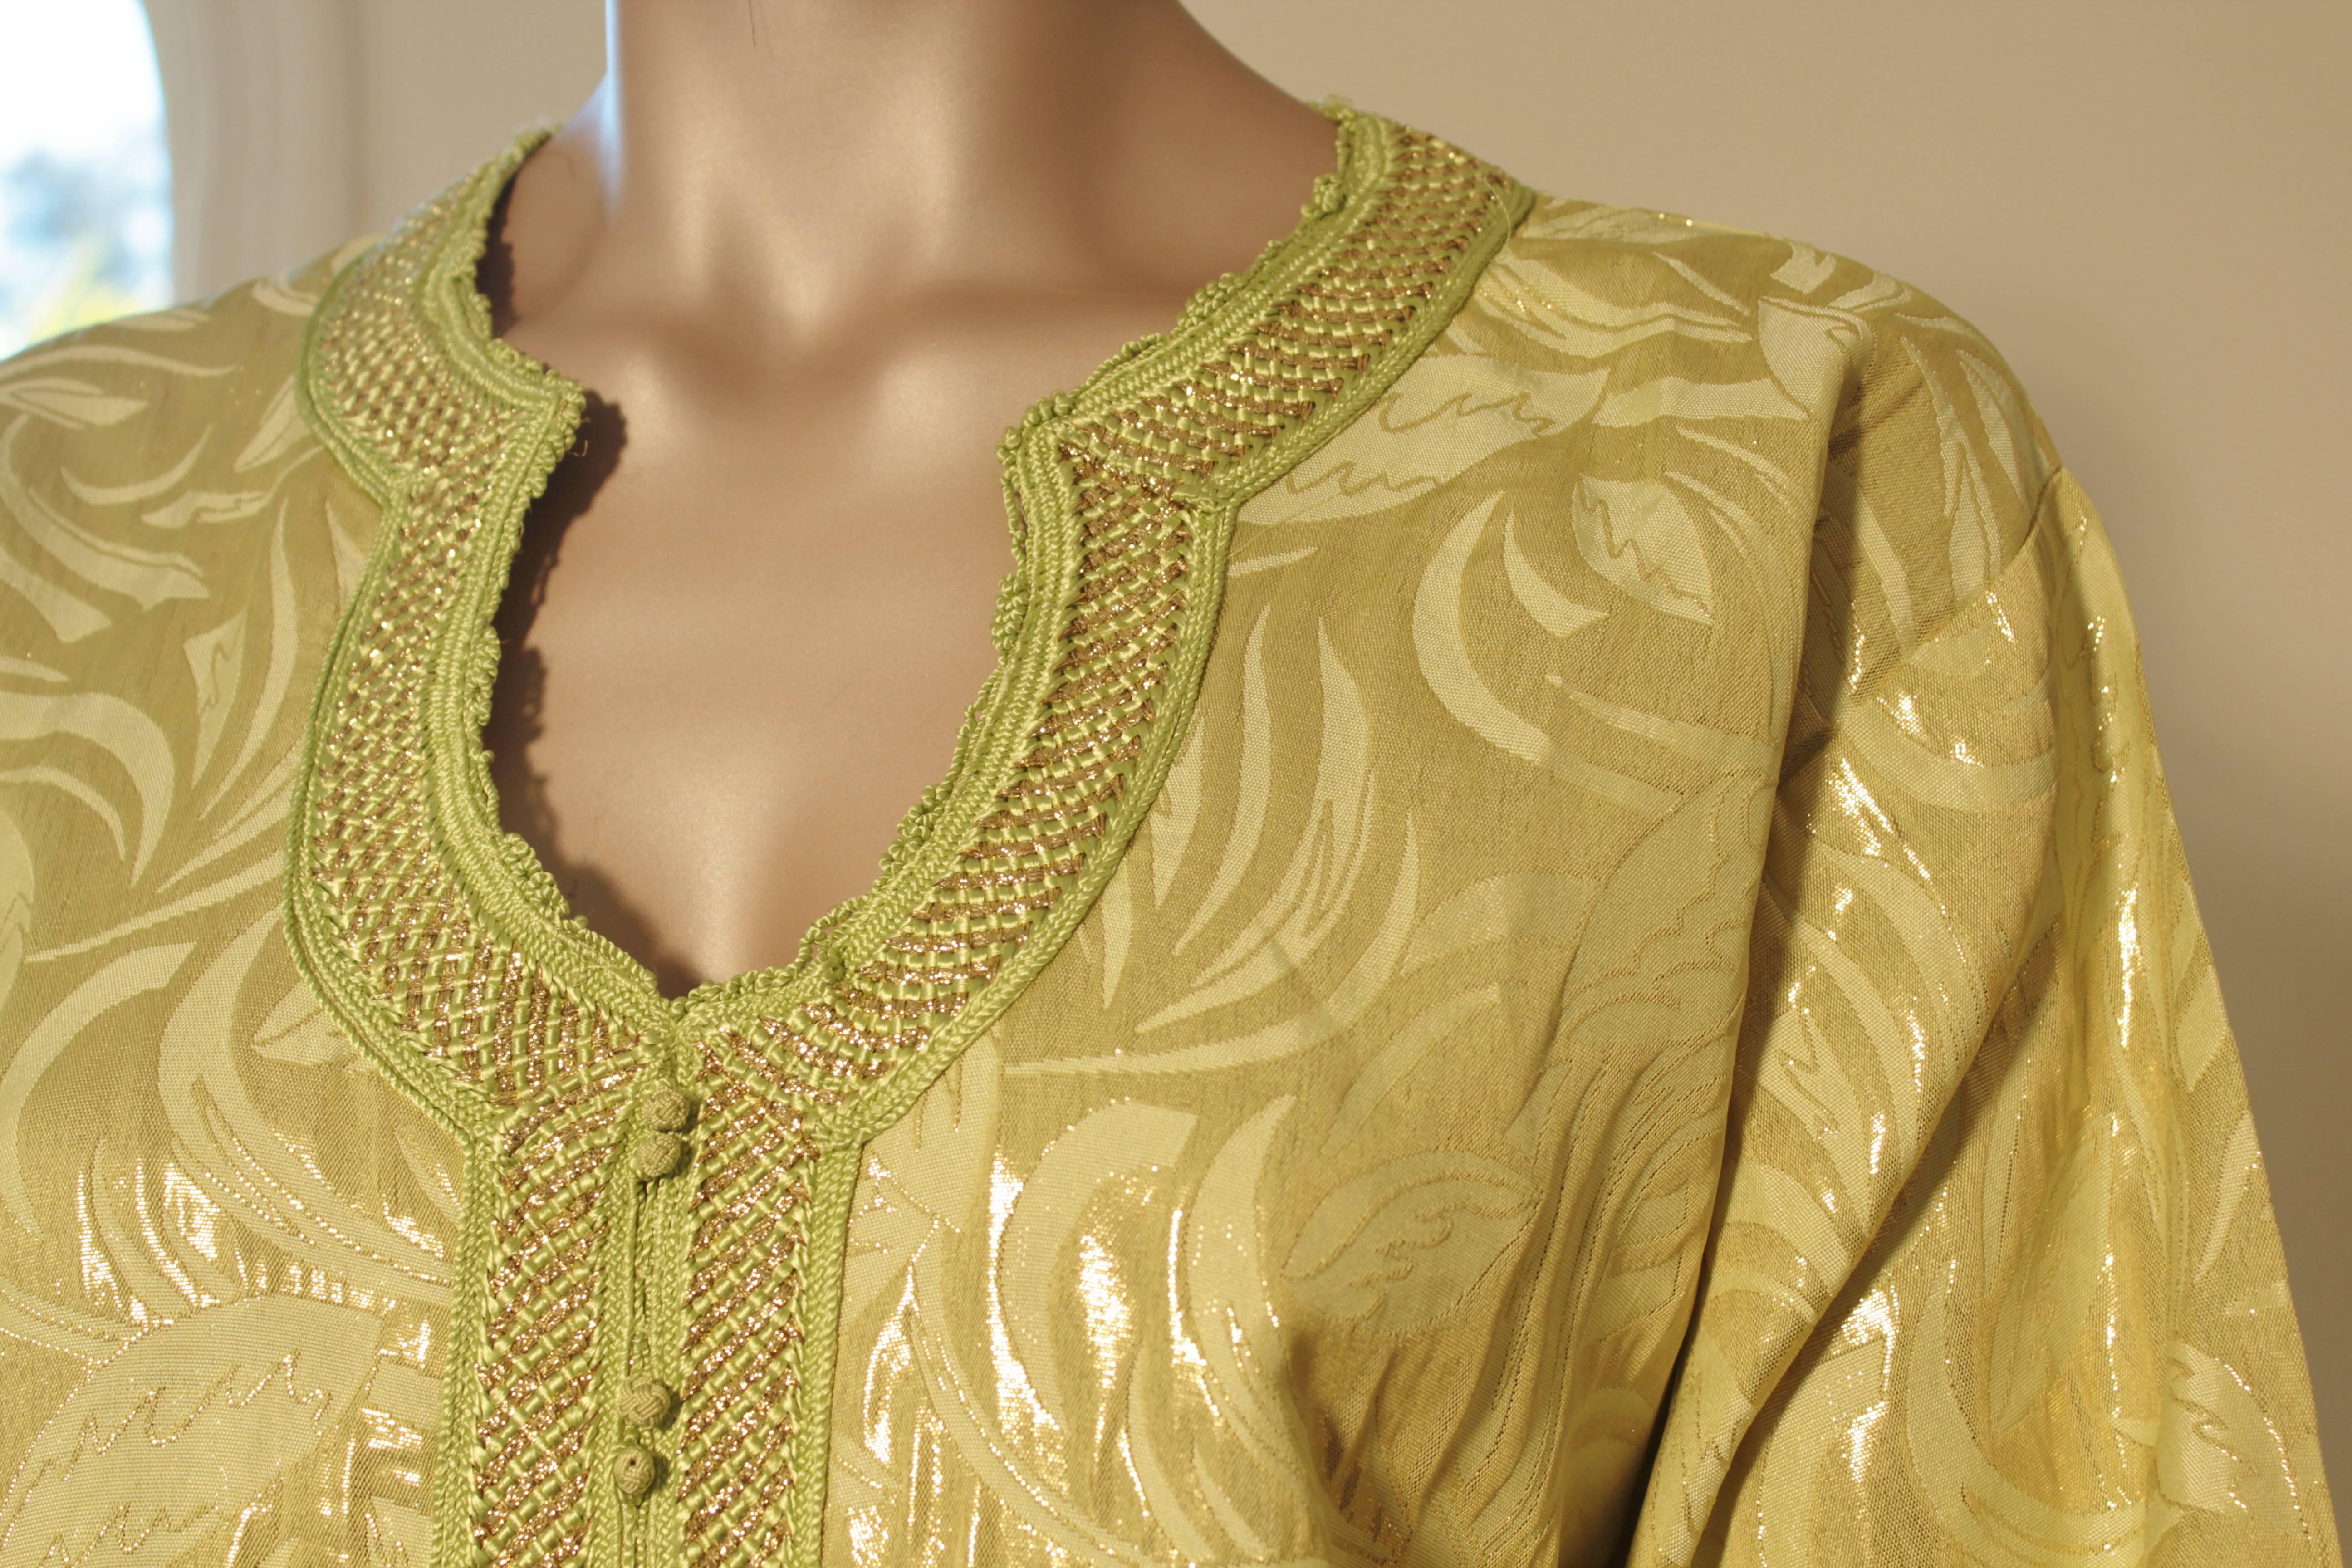 Moroccan Moorish Caftan Gown in Gold Brocade Maxi Dress Kaftan Size M to L In Good Condition For Sale In North Hollywood, CA